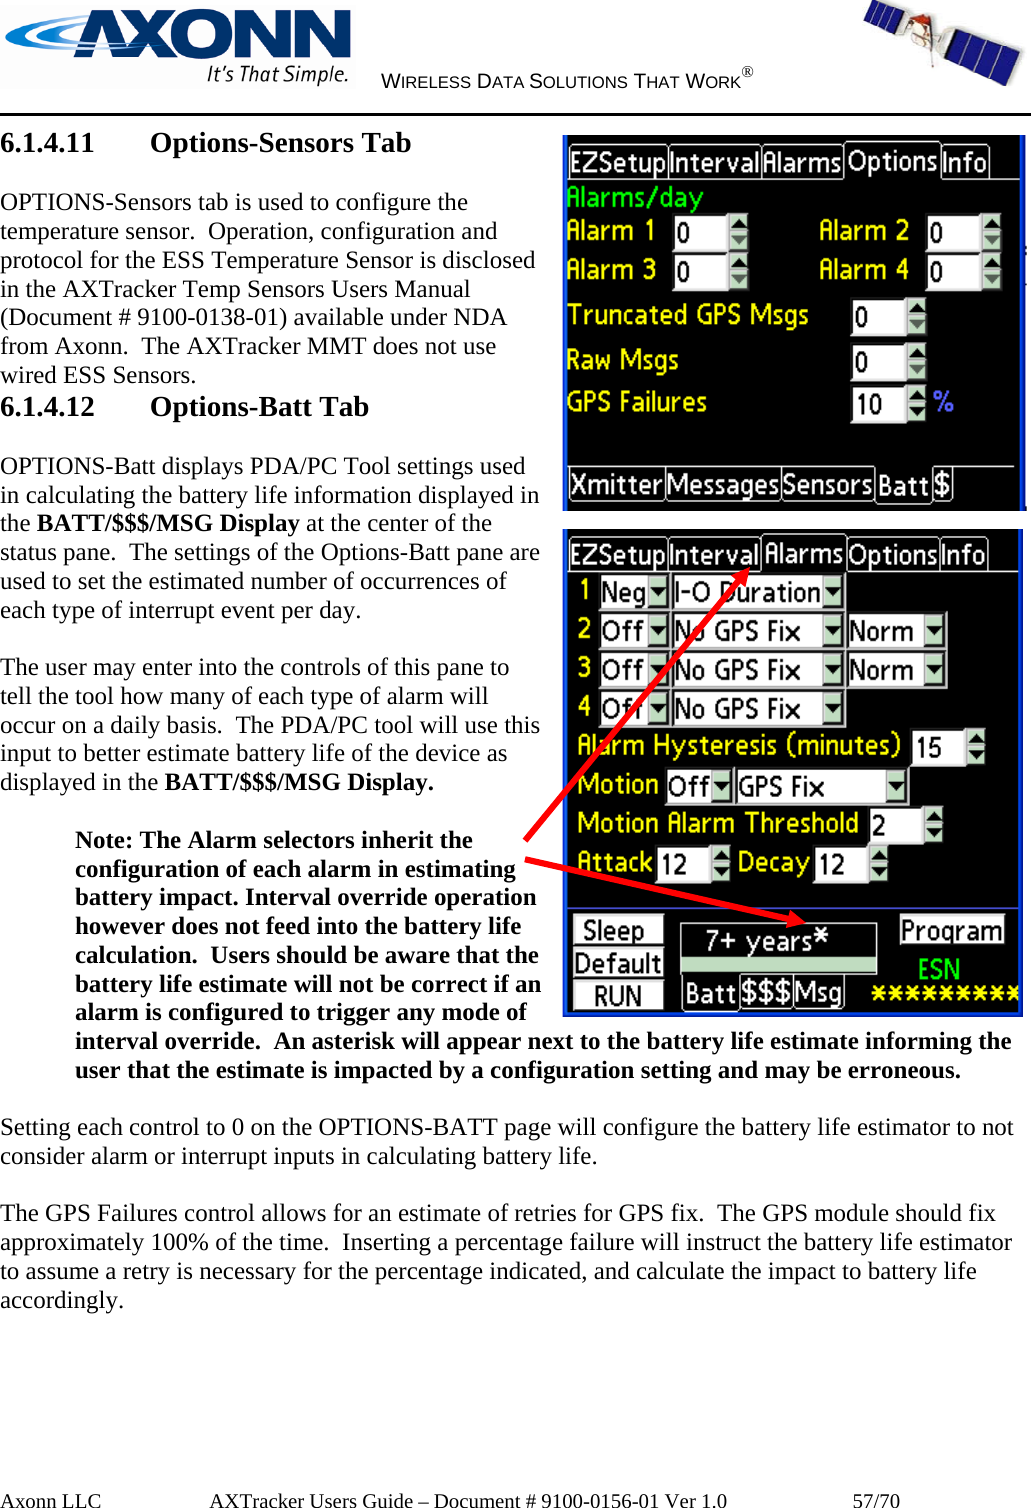     WIRELESS DATA SOLUTIONS THAT WORK®   Axonn LLC         AXTracker Users Guide – Document # 9100-0156-01 Ver 1.0                  57/70 6.1.4.11 Options-Sensors Tab  OPTIONS-Sensors tab is used to configure the temperature sensor.  Operation, configuration and protocol for the ESS Temperature Sensor is disclosed in the AXTracker Temp Sensors Users Manual (Document # 9100-0138-01) available under NDA from Axonn.  The AXTracker MMT does not use wired ESS Sensors. 6.1.4.12 Options-Batt Tab  OPTIONS-Batt displays PDA/PC Tool settings used in calculating the battery life information displayed in the BATT/$$$/MSG Display at the center of the status pane.  The settings of the Options-Batt pane are used to set the estimated number of occurrences of each type of interrupt event per day.   The user may enter into the controls of this pane to tell the tool how many of each type of alarm will occur on a daily basis.  The PDA/PC tool will use this input to better estimate battery life of the device as displayed in the BATT/$$$/MSG Display.  Note: The Alarm selectors inherit the configuration of each alarm in estimating battery impact. Interval override operation however does not feed into the battery life calculation.  Users should be aware that the battery life estimate will not be correct if an alarm is configured to trigger any mode of interval override.  An asterisk will appear next to the battery life estimate informing the user that the estimate is impacted by a configuration setting and may be erroneous.   Setting each control to 0 on the OPTIONS-BATT page will configure the battery life estimator to not consider alarm or interrupt inputs in calculating battery life.    The GPS Failures control allows for an estimate of retries for GPS fix.  The GPS module should fix approximately 100% of the time.  Inserting a percentage failure will instruct the battery life estimator to assume a retry is necessary for the percentage indicated, and calculate the impact to battery life accordingly.  